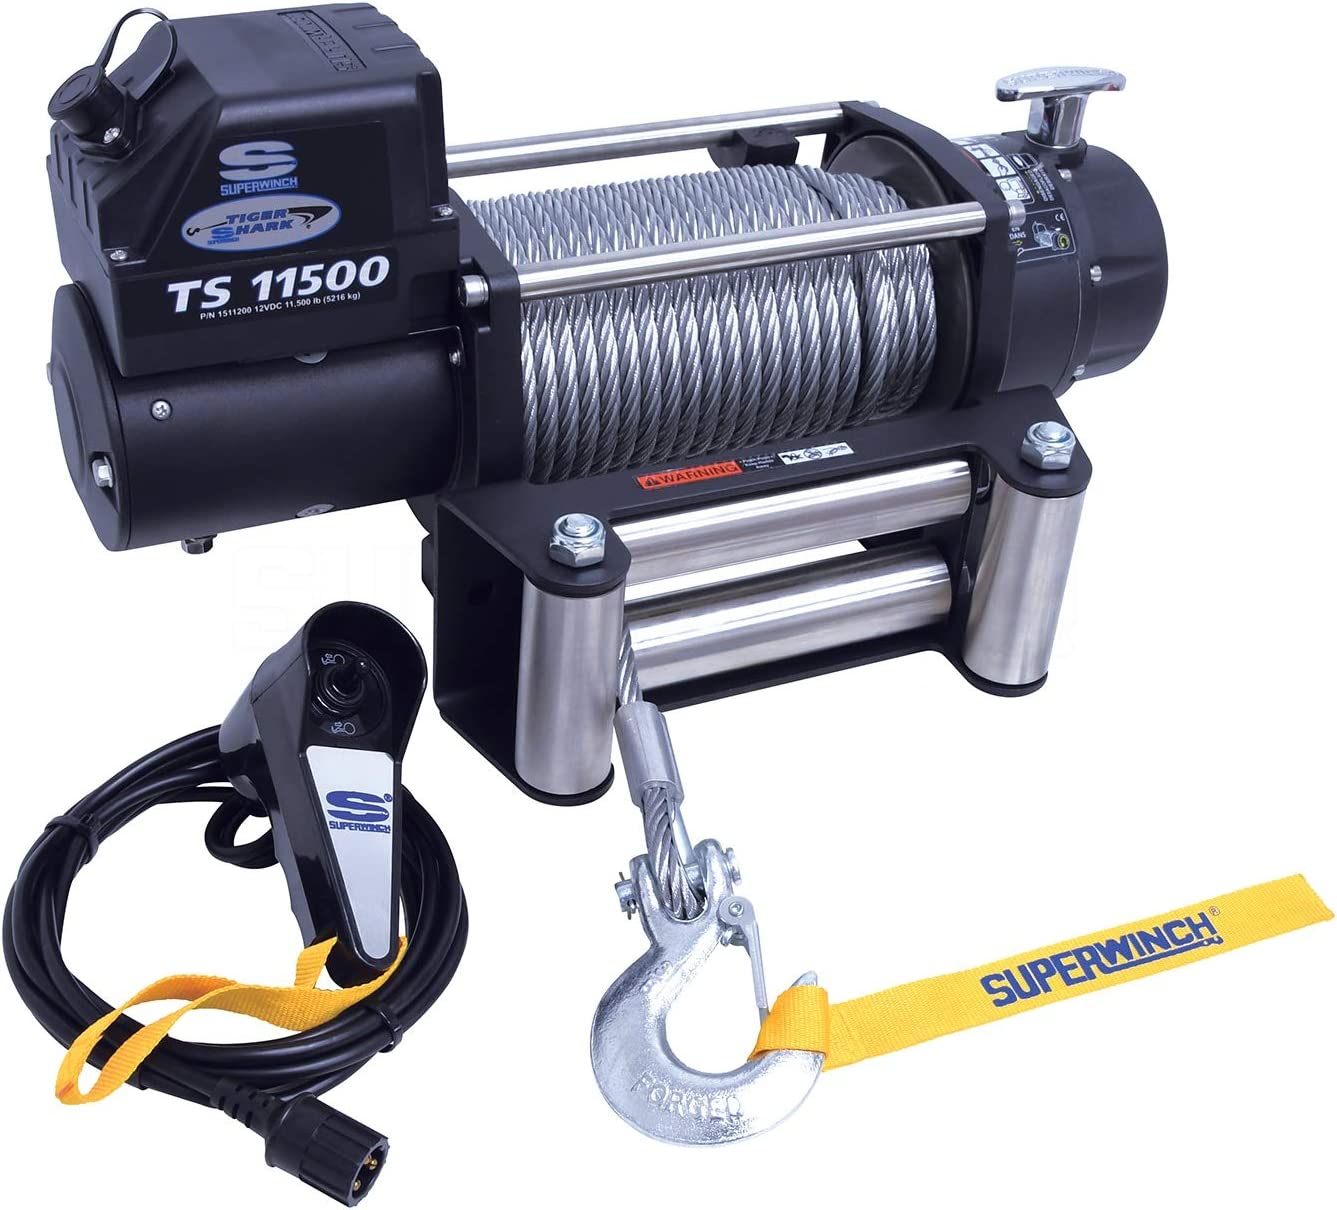 Superwinch Tiger Shark 11500 12V Wire Rope Winch - 1511200